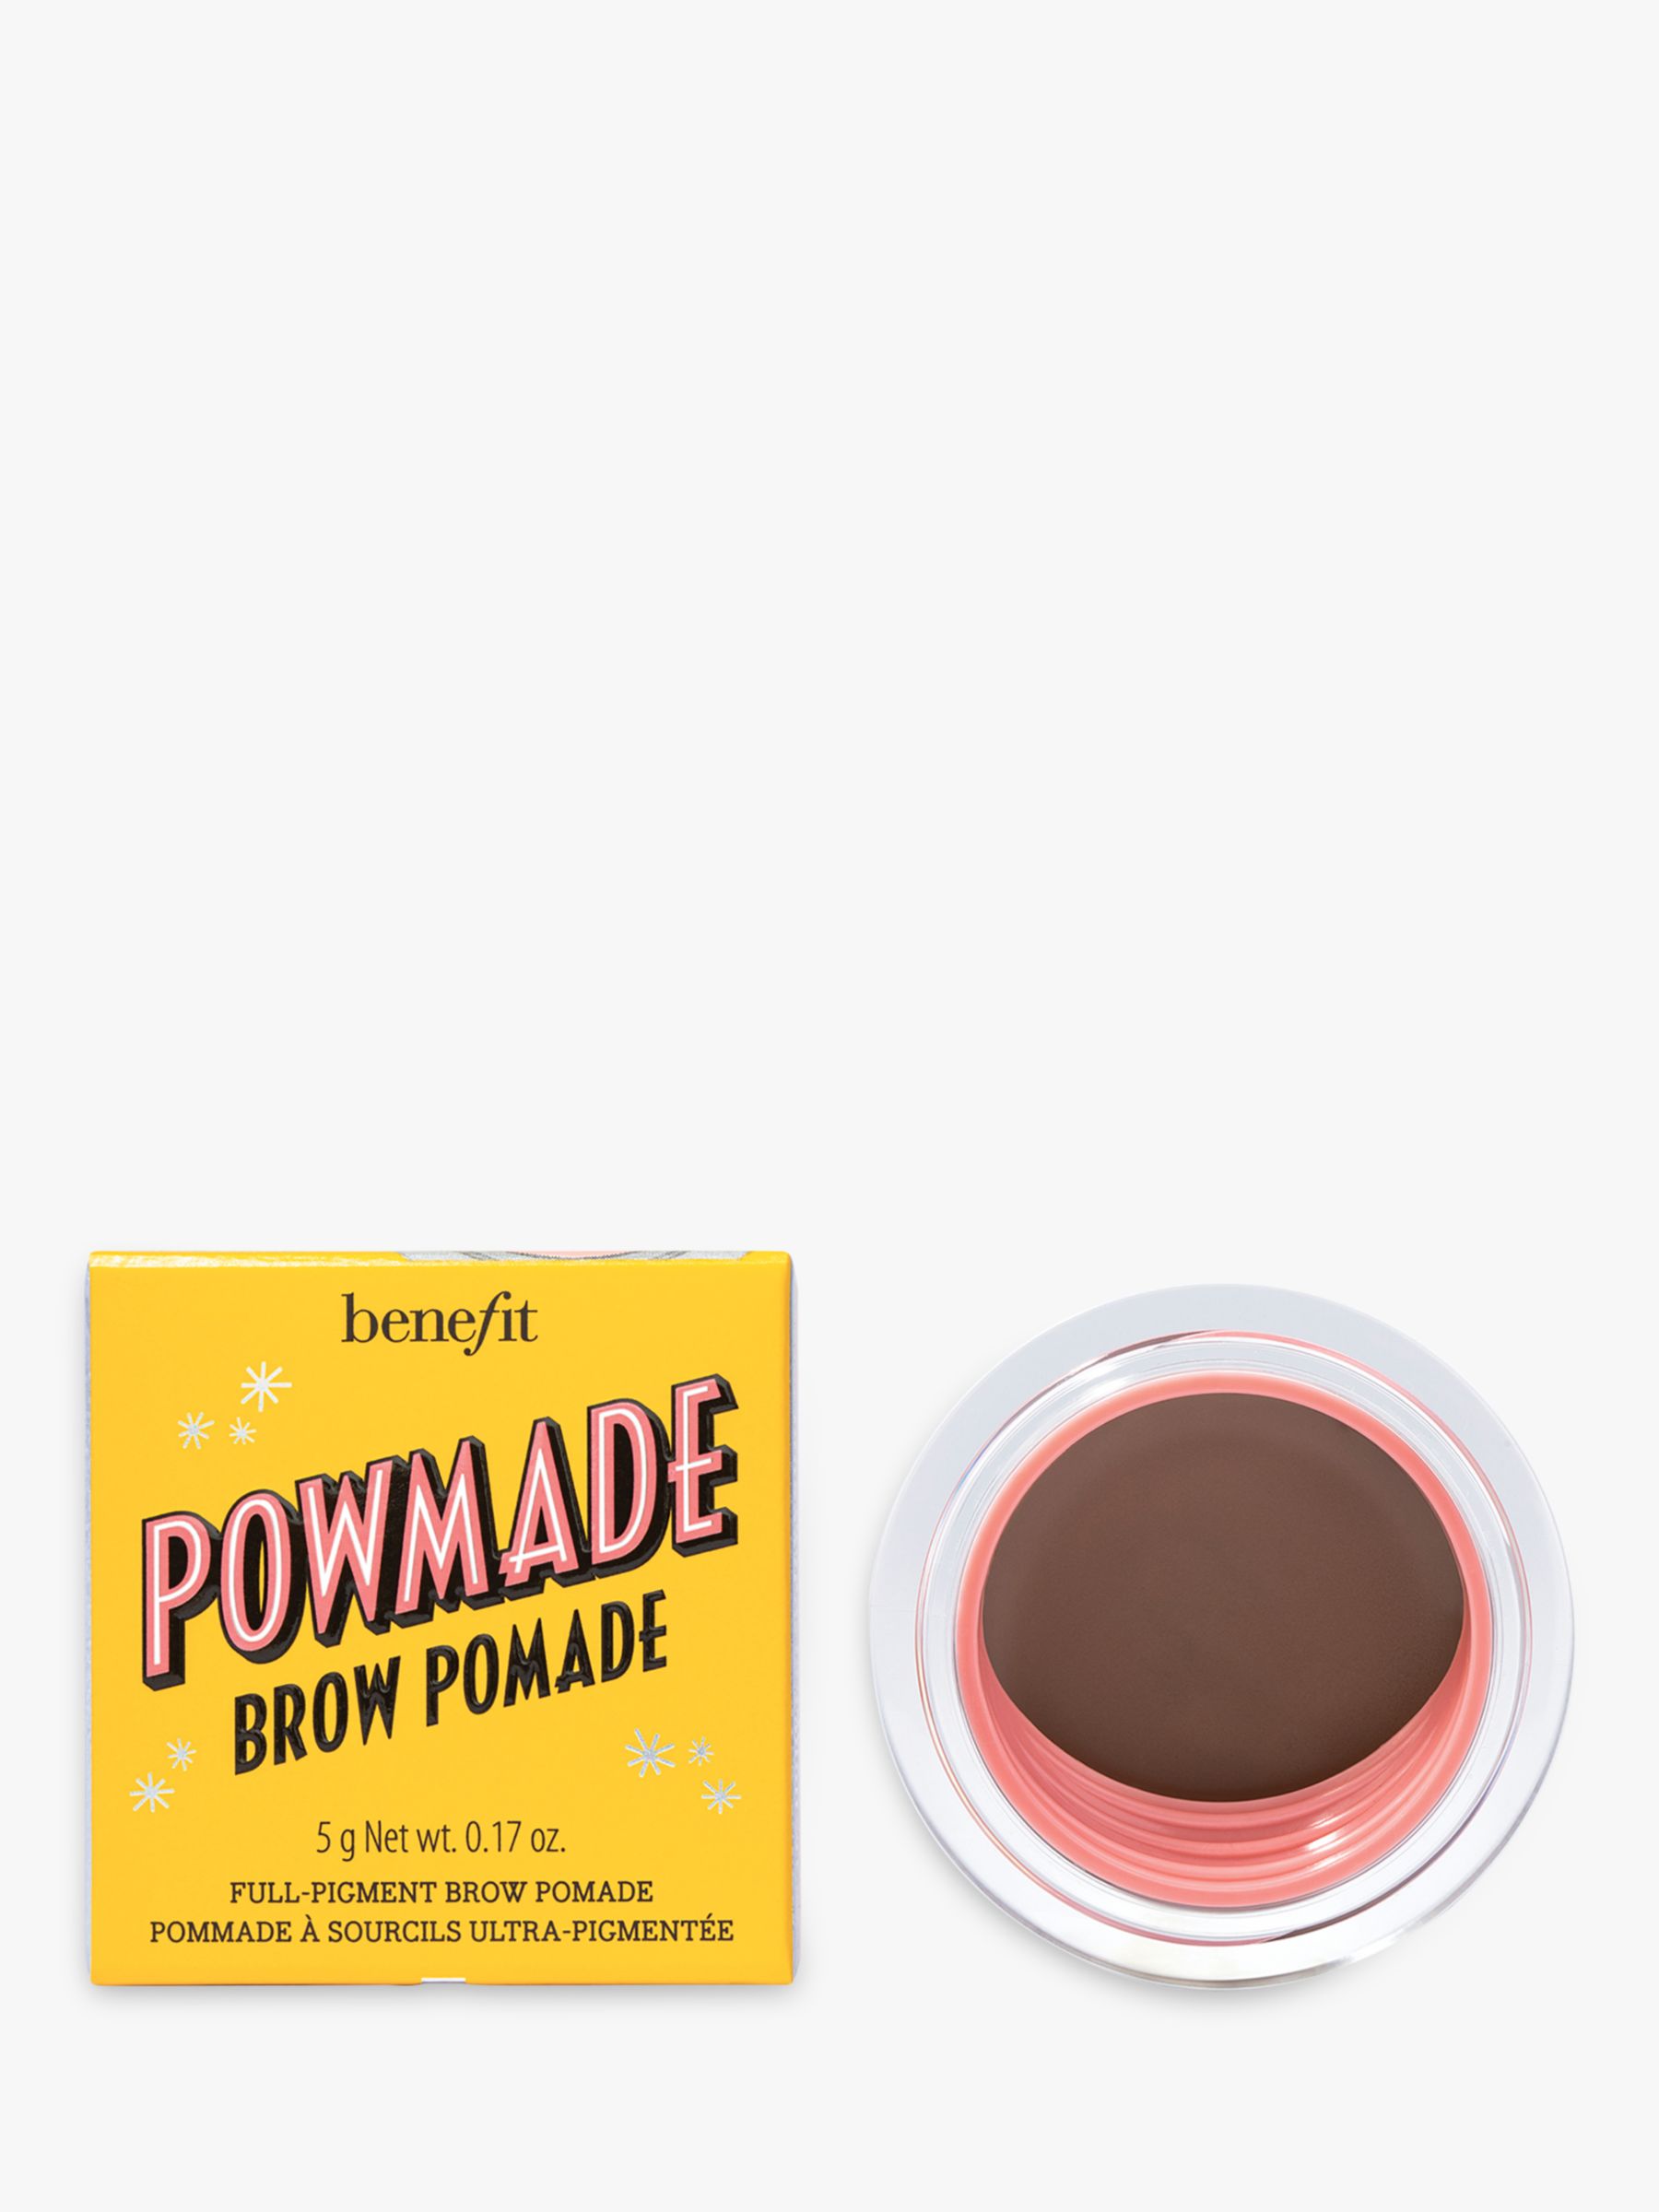 Benefit POWmade Brow Pomade Full-Pigment Brow Pomade, 02 1